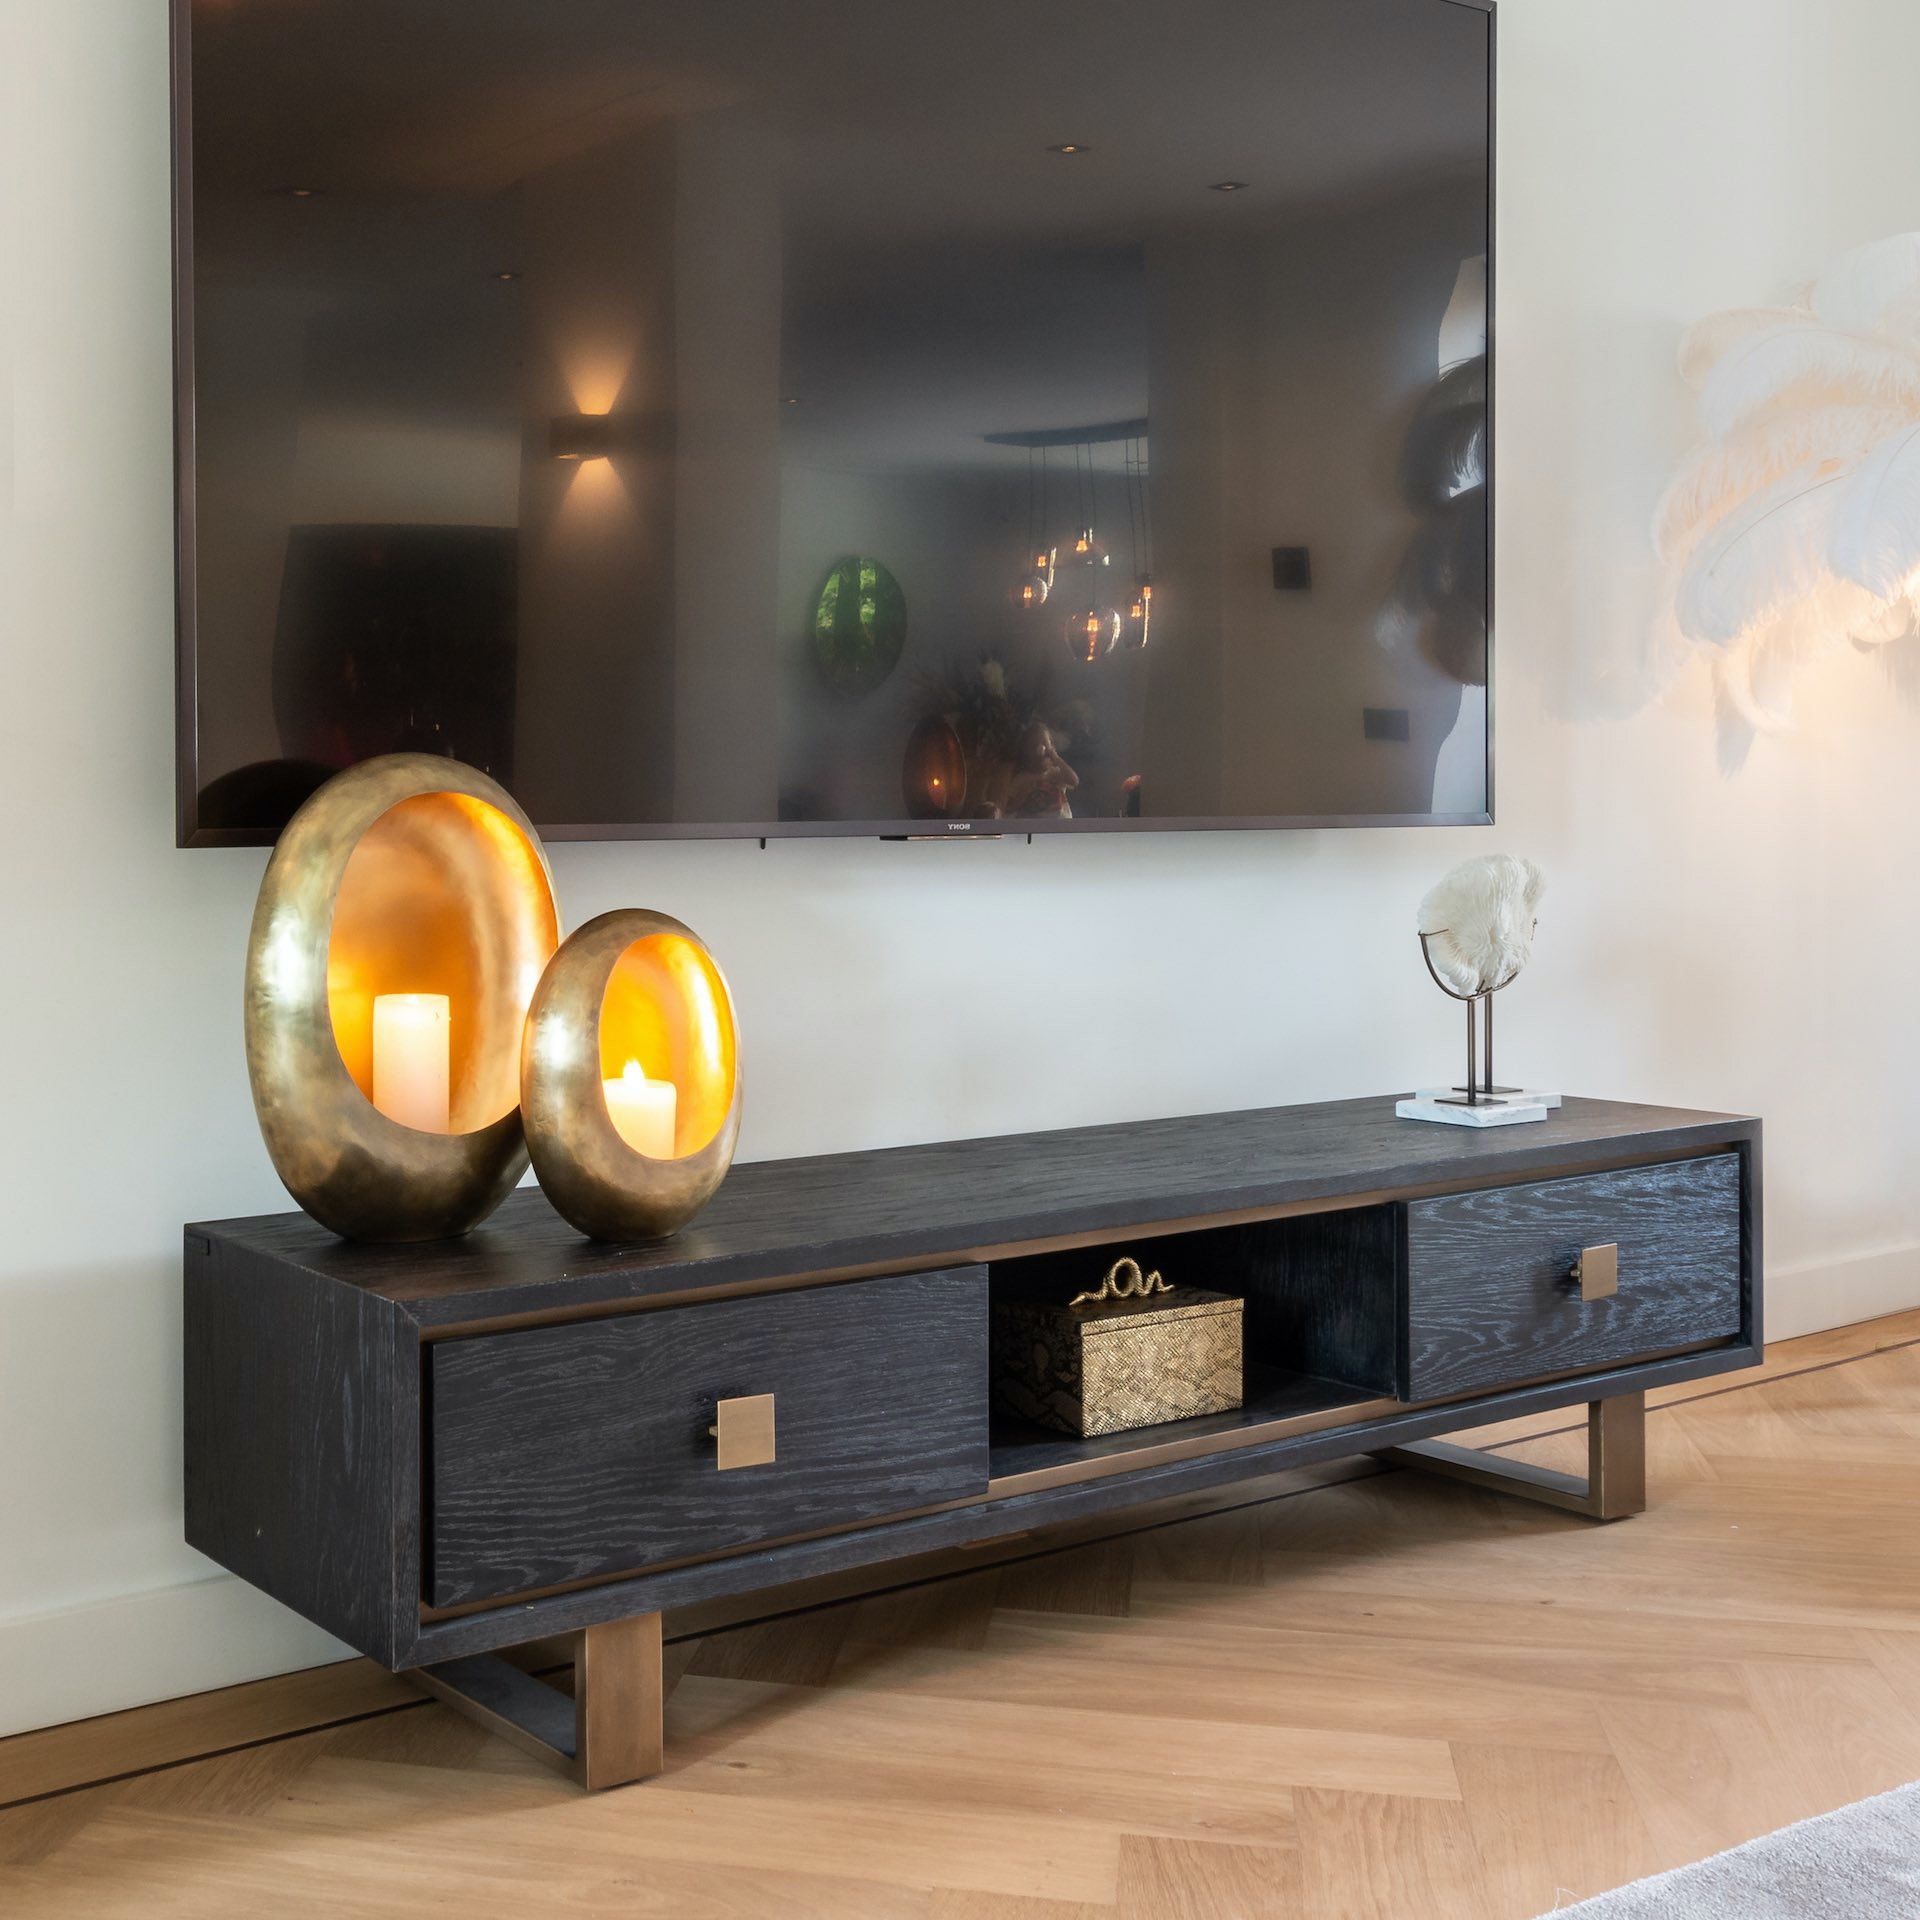 Most Recent Brushed Gold Effect And Black Oak Tv Unit – Juliettes Interiors With Satin Gold Tv Stands (View 4 of 10)